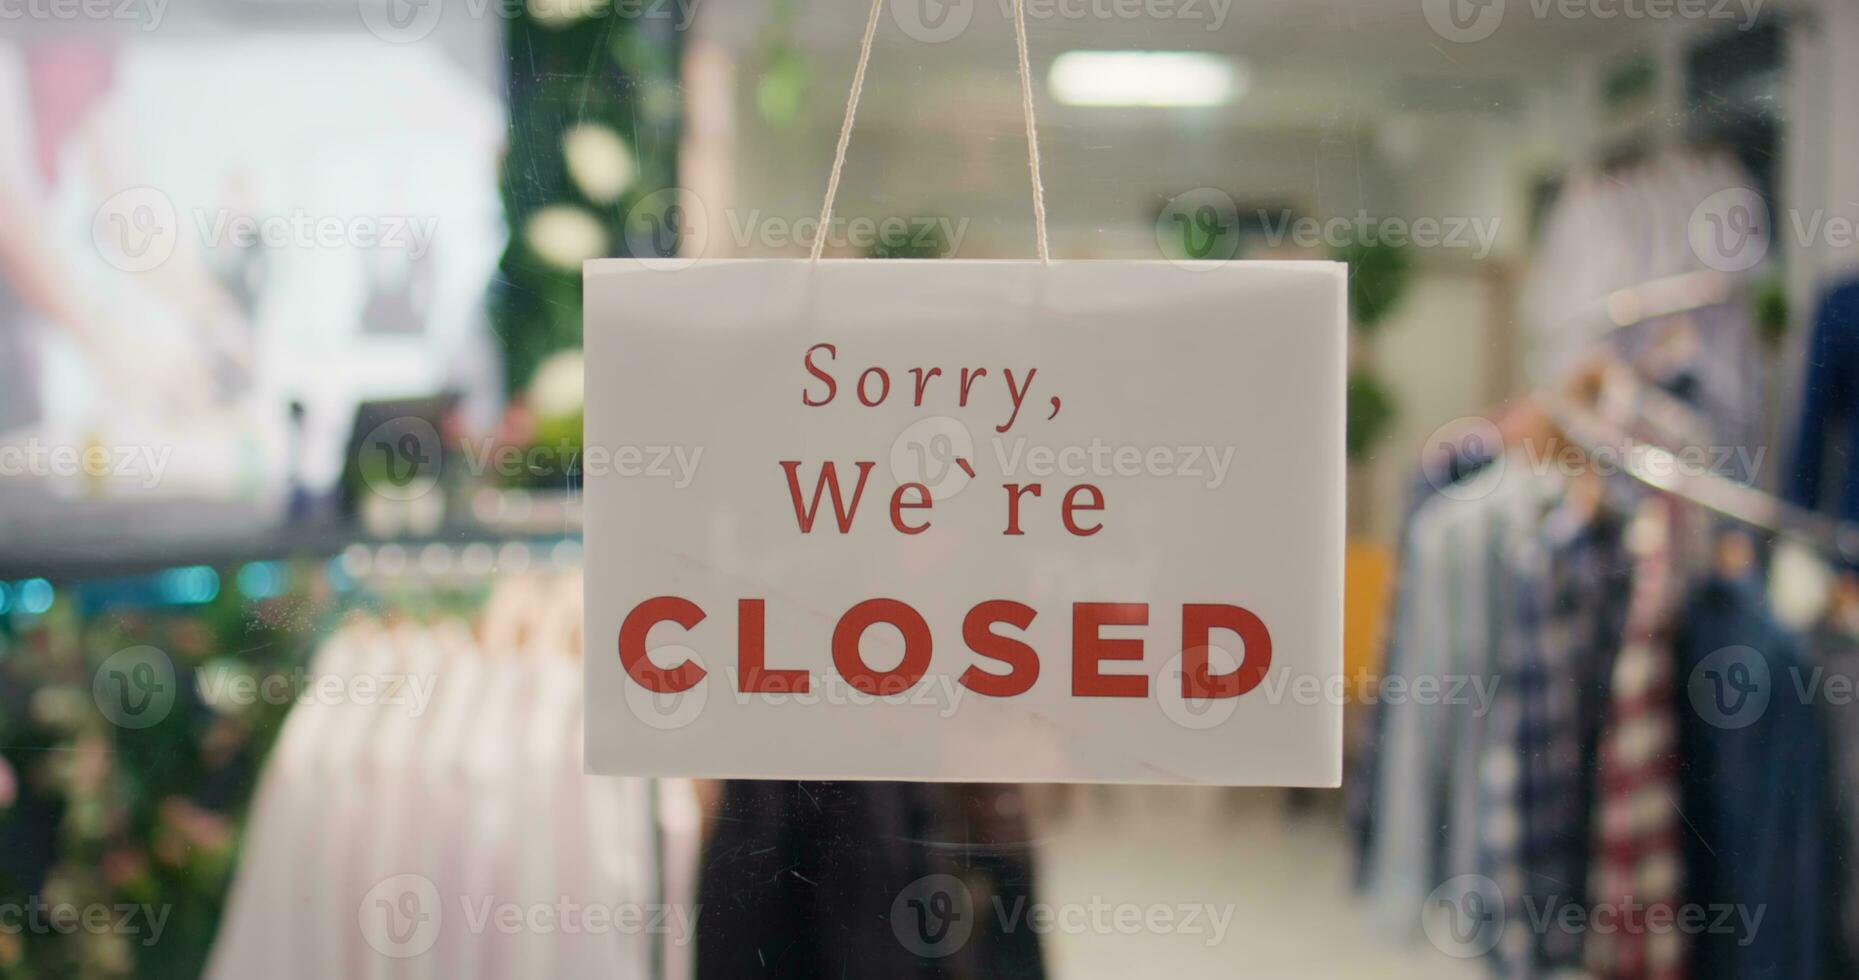 Trendy clothing store being closed at night after finished working hours. Extreme close up shot on sorry we are closed message sign on fashion boutique door in mall at shift end photo